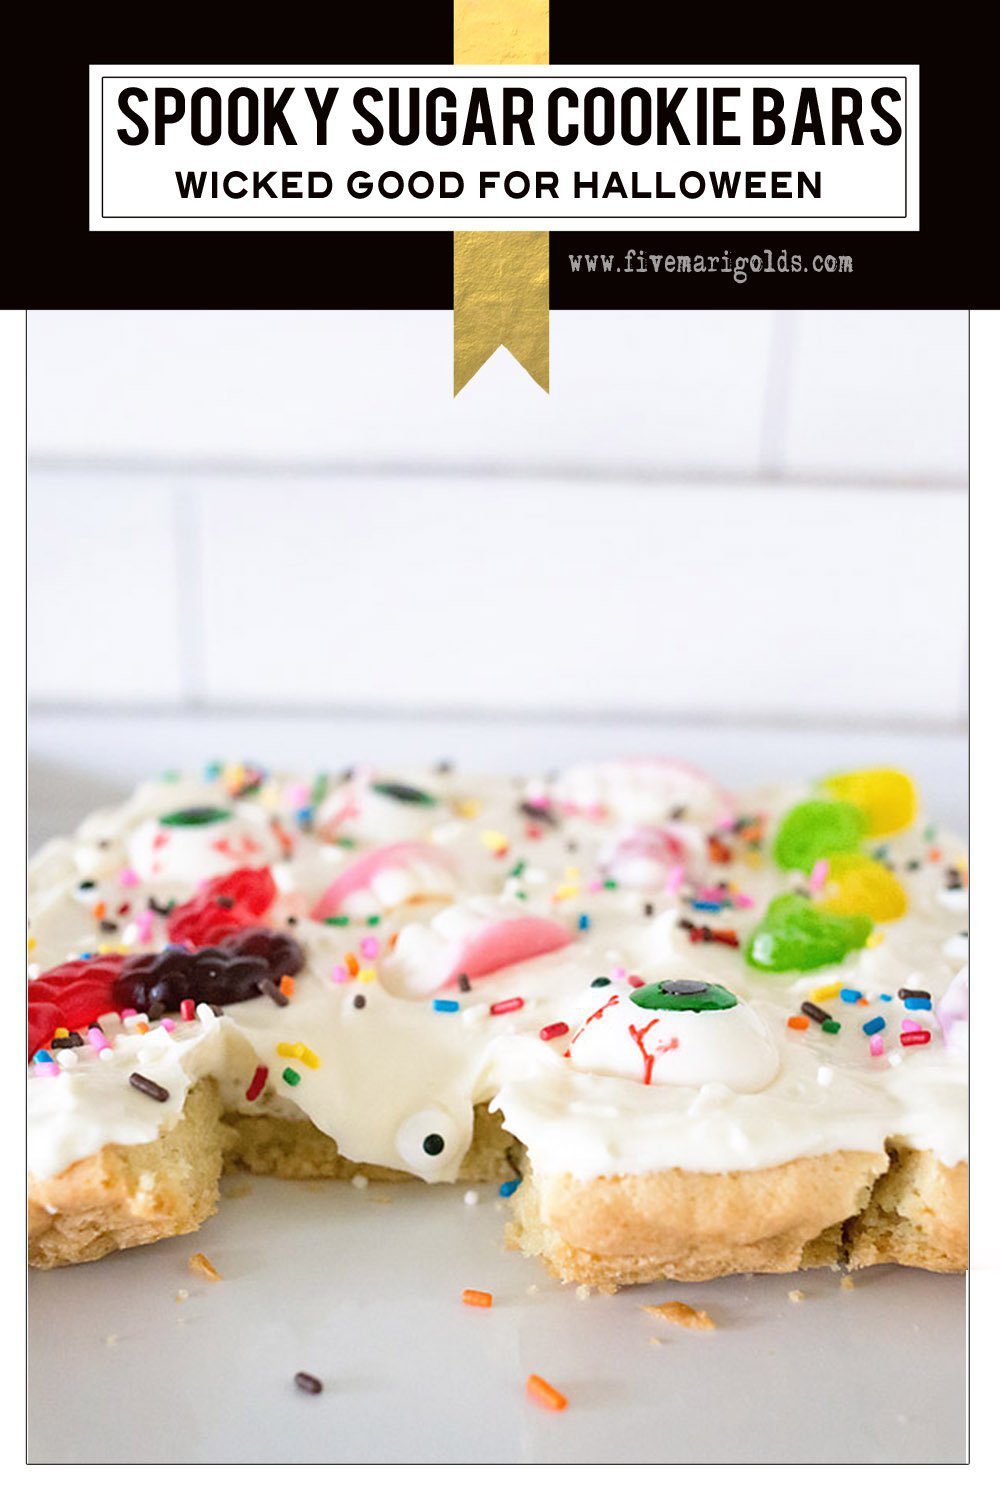 Spooky and Sweet, these sugar cookie bars are perfect for your Halloween party!